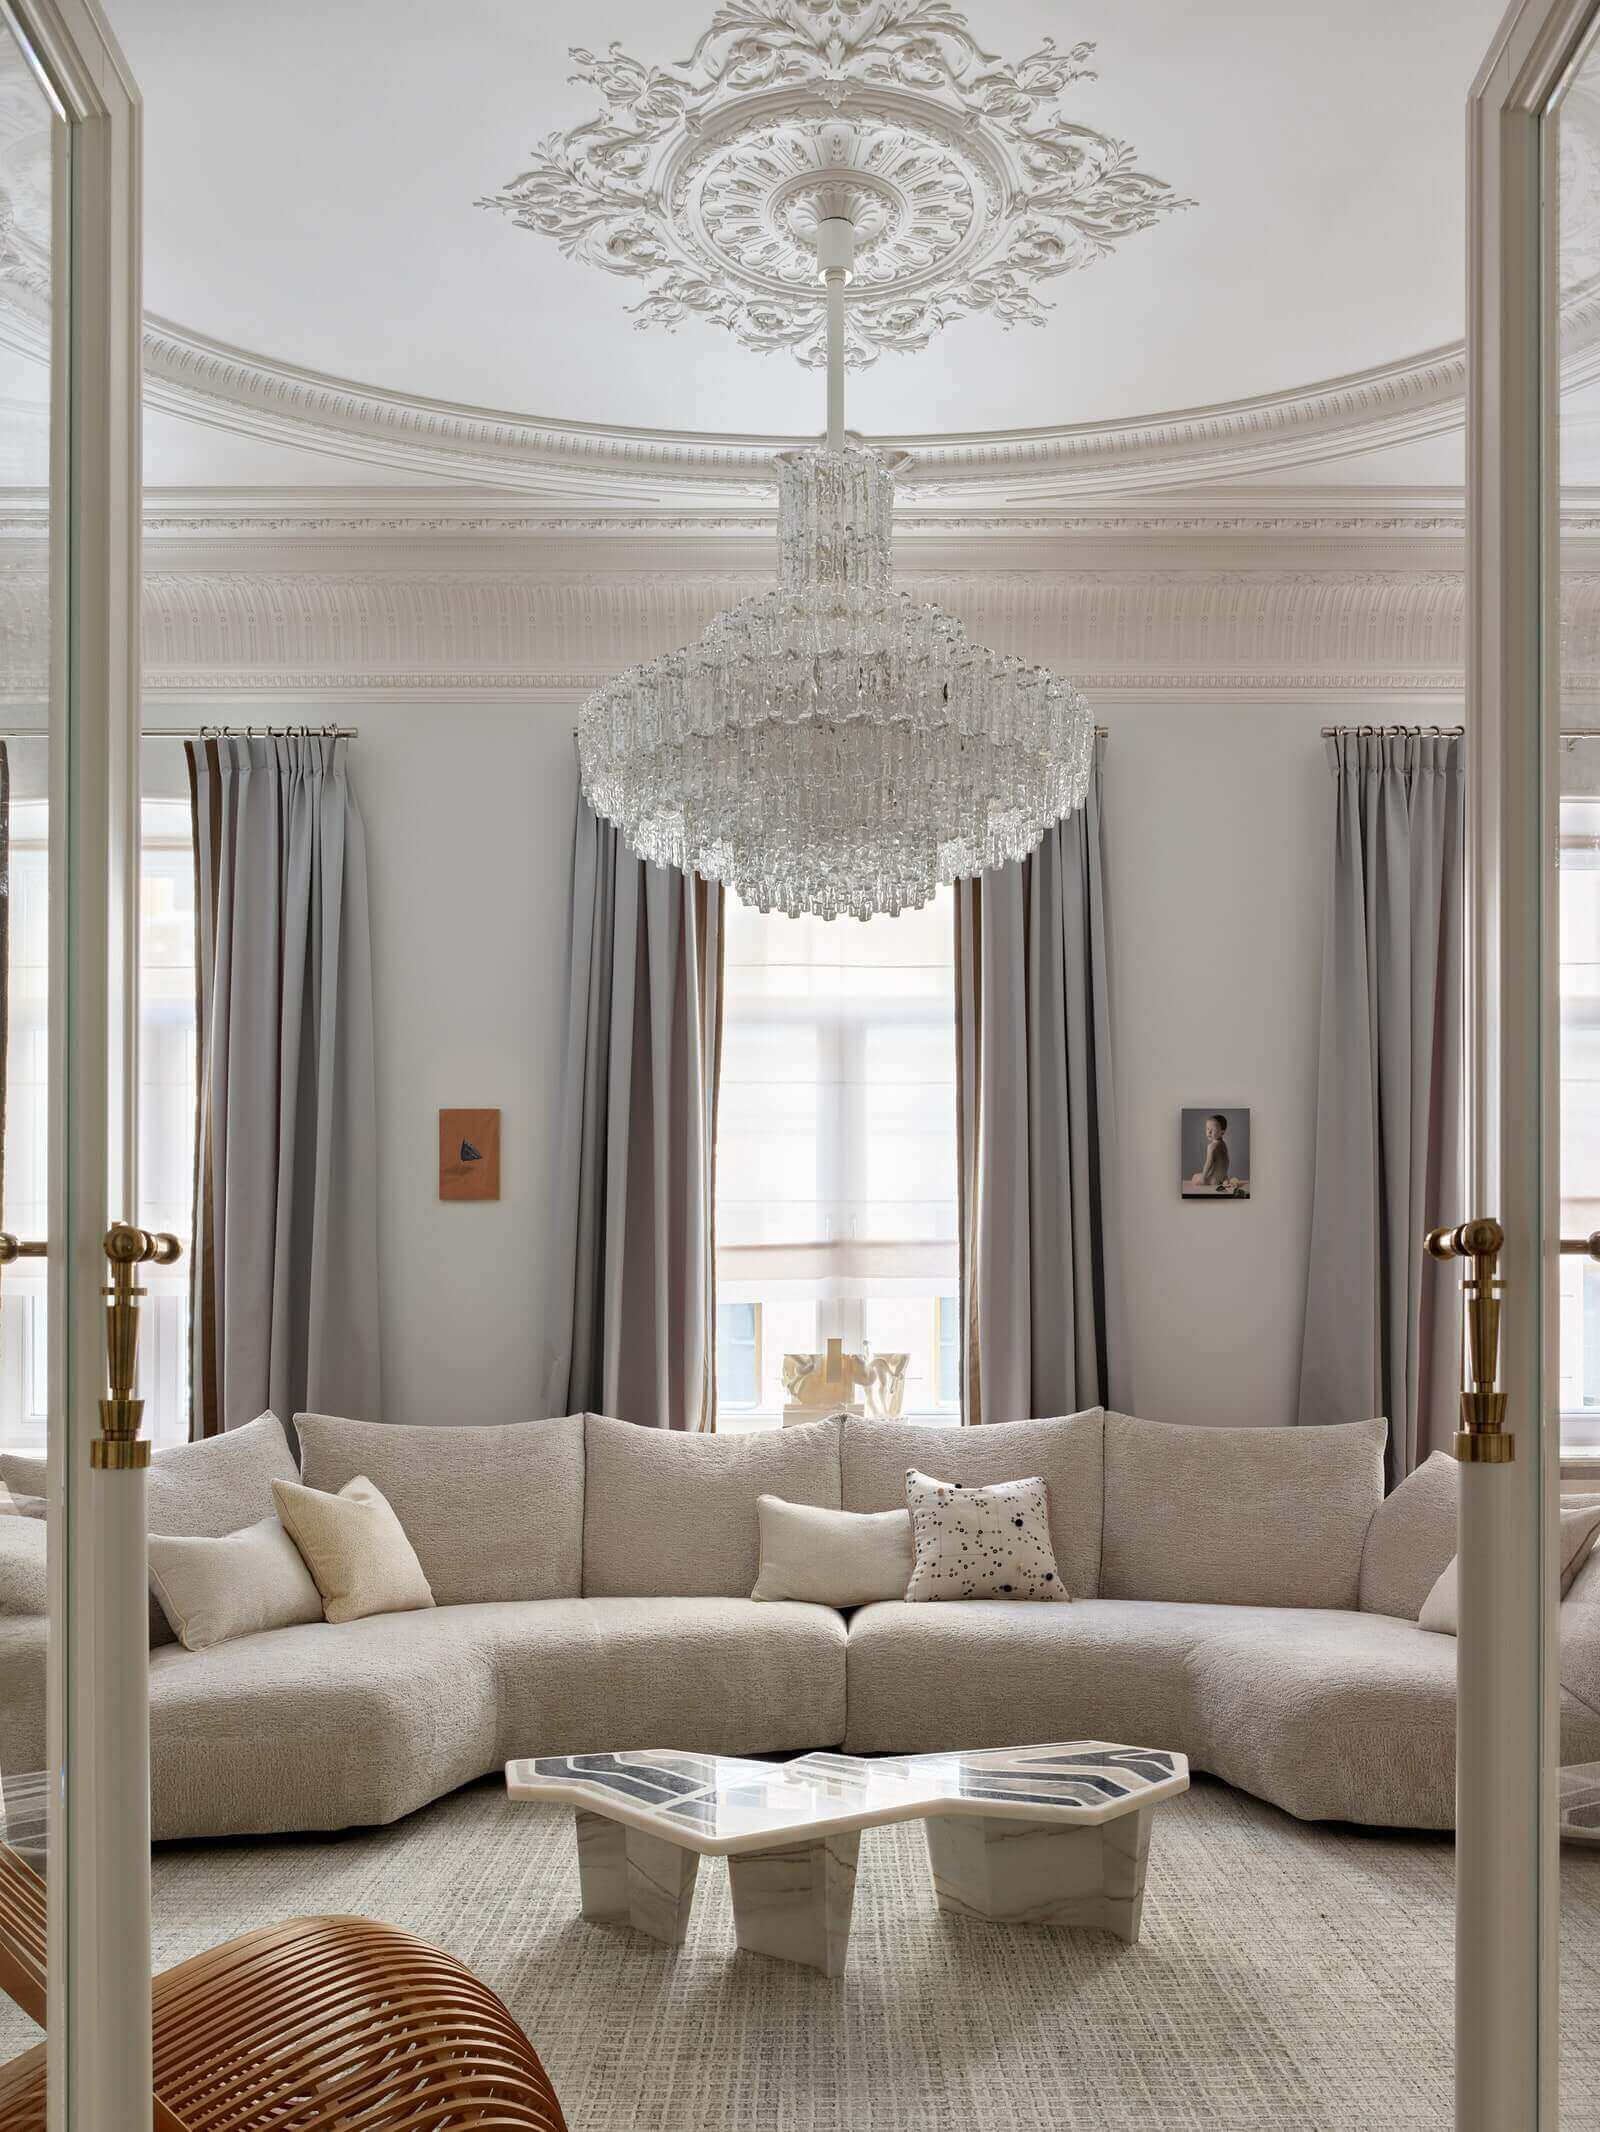 The Contemporary Apartment of Anna Zinkovskaya In Moscow